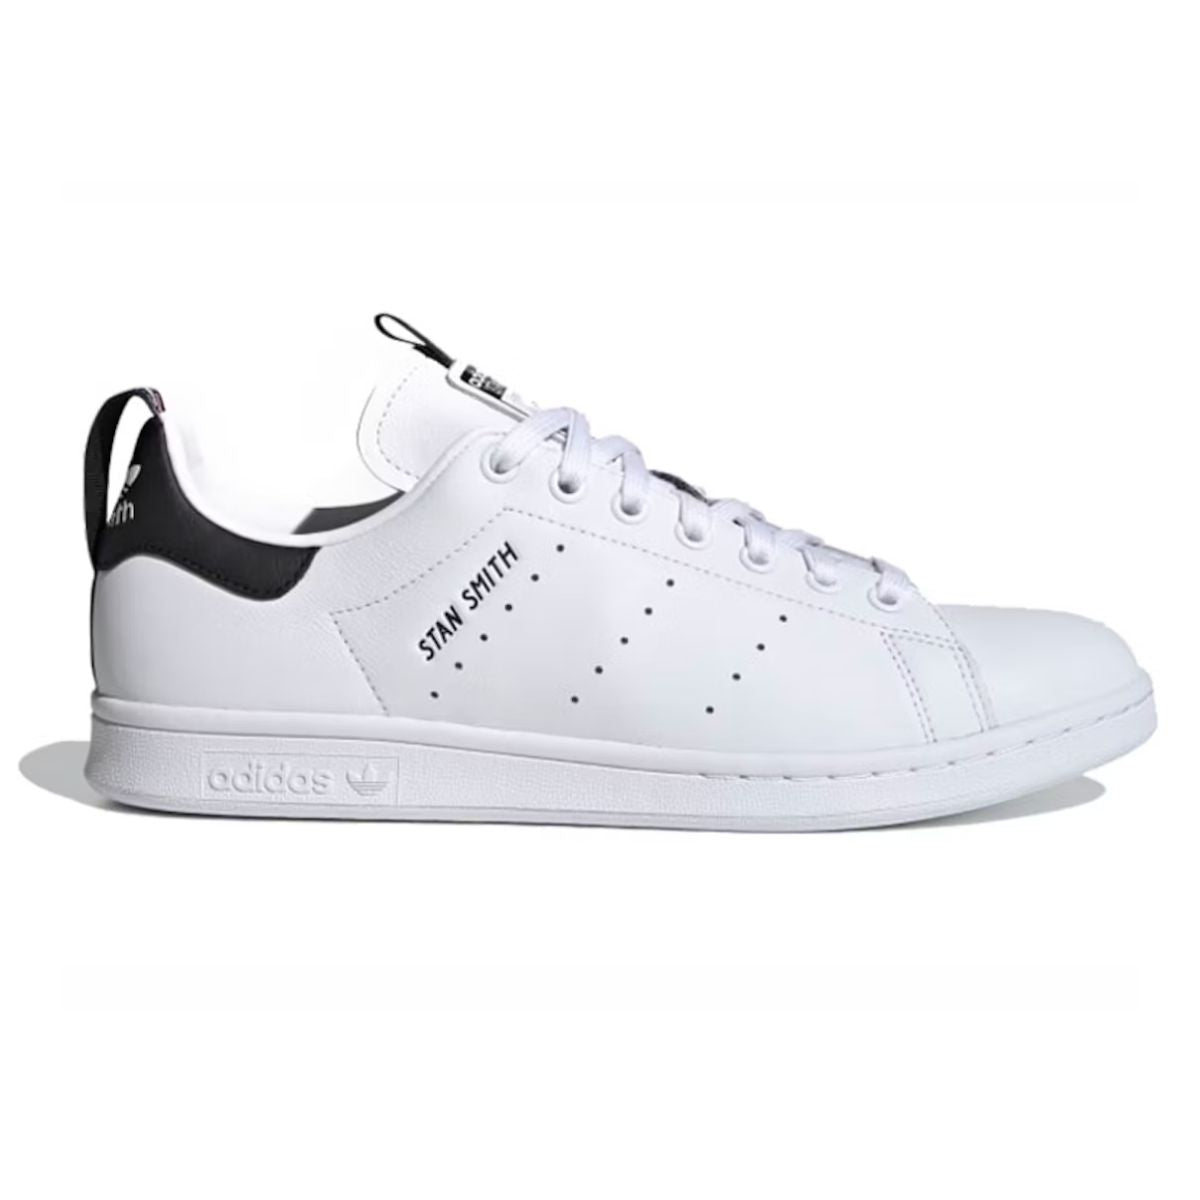 Adidas Stan Smith Replacement Shoelaces